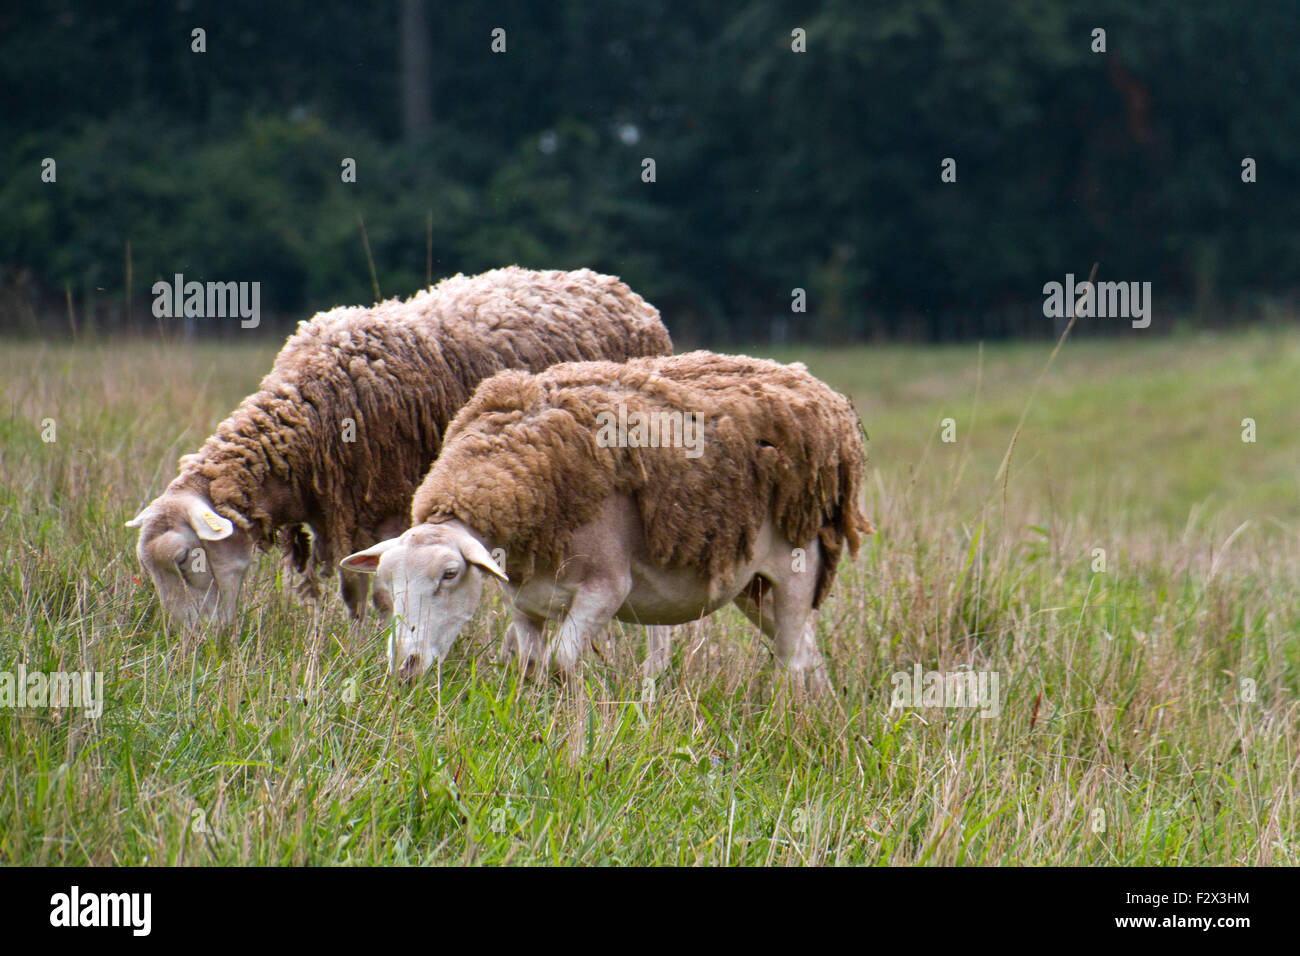 Shaggy mountain sheep graze peacefully together in a meadow of wild grass with a forest behind it in late summer Stock Photo